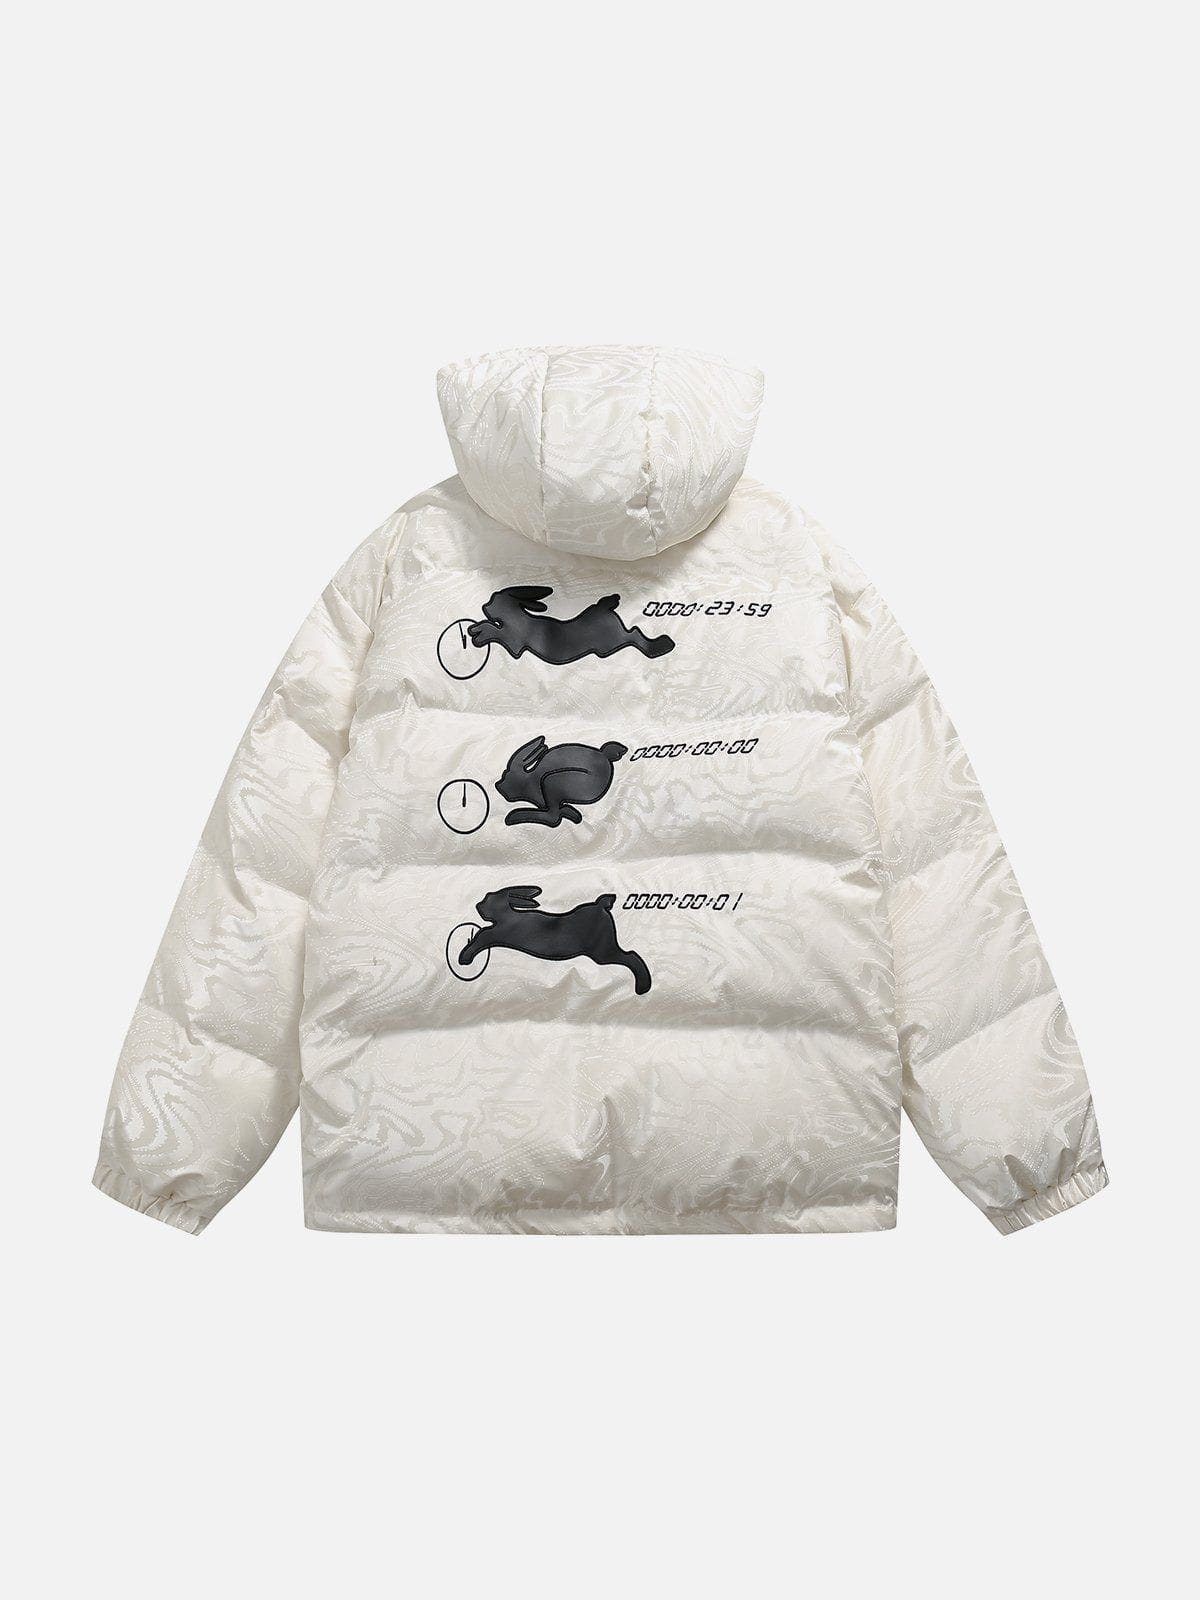 Majesda® - Solid Color Rabbit Graphic Winter Coat outfit ideas, streetwear fashion - majesda.com